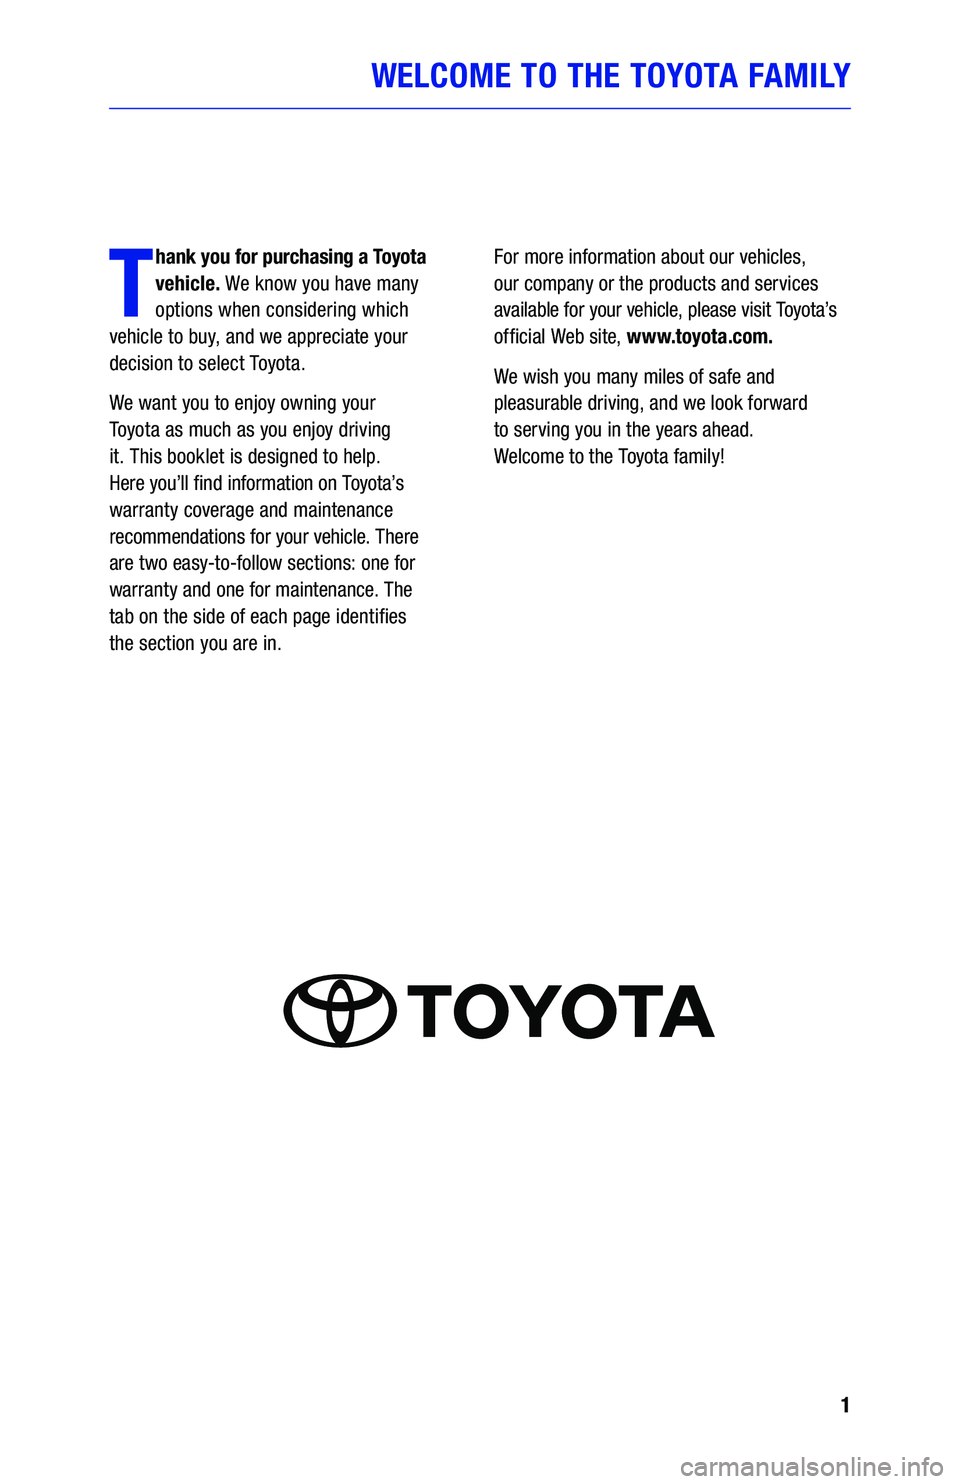 TOYOTA YARIS 2019  Warranties & Maintenance Guides (in English) 1
WELCOME TO THE TOYOTA FAMILY
T
hank you for purchasing a Toyota 
vehicle. We know you have many 
options when considering which   
vehicle to buy, and we appreciate your 
decision to select Toyota.
